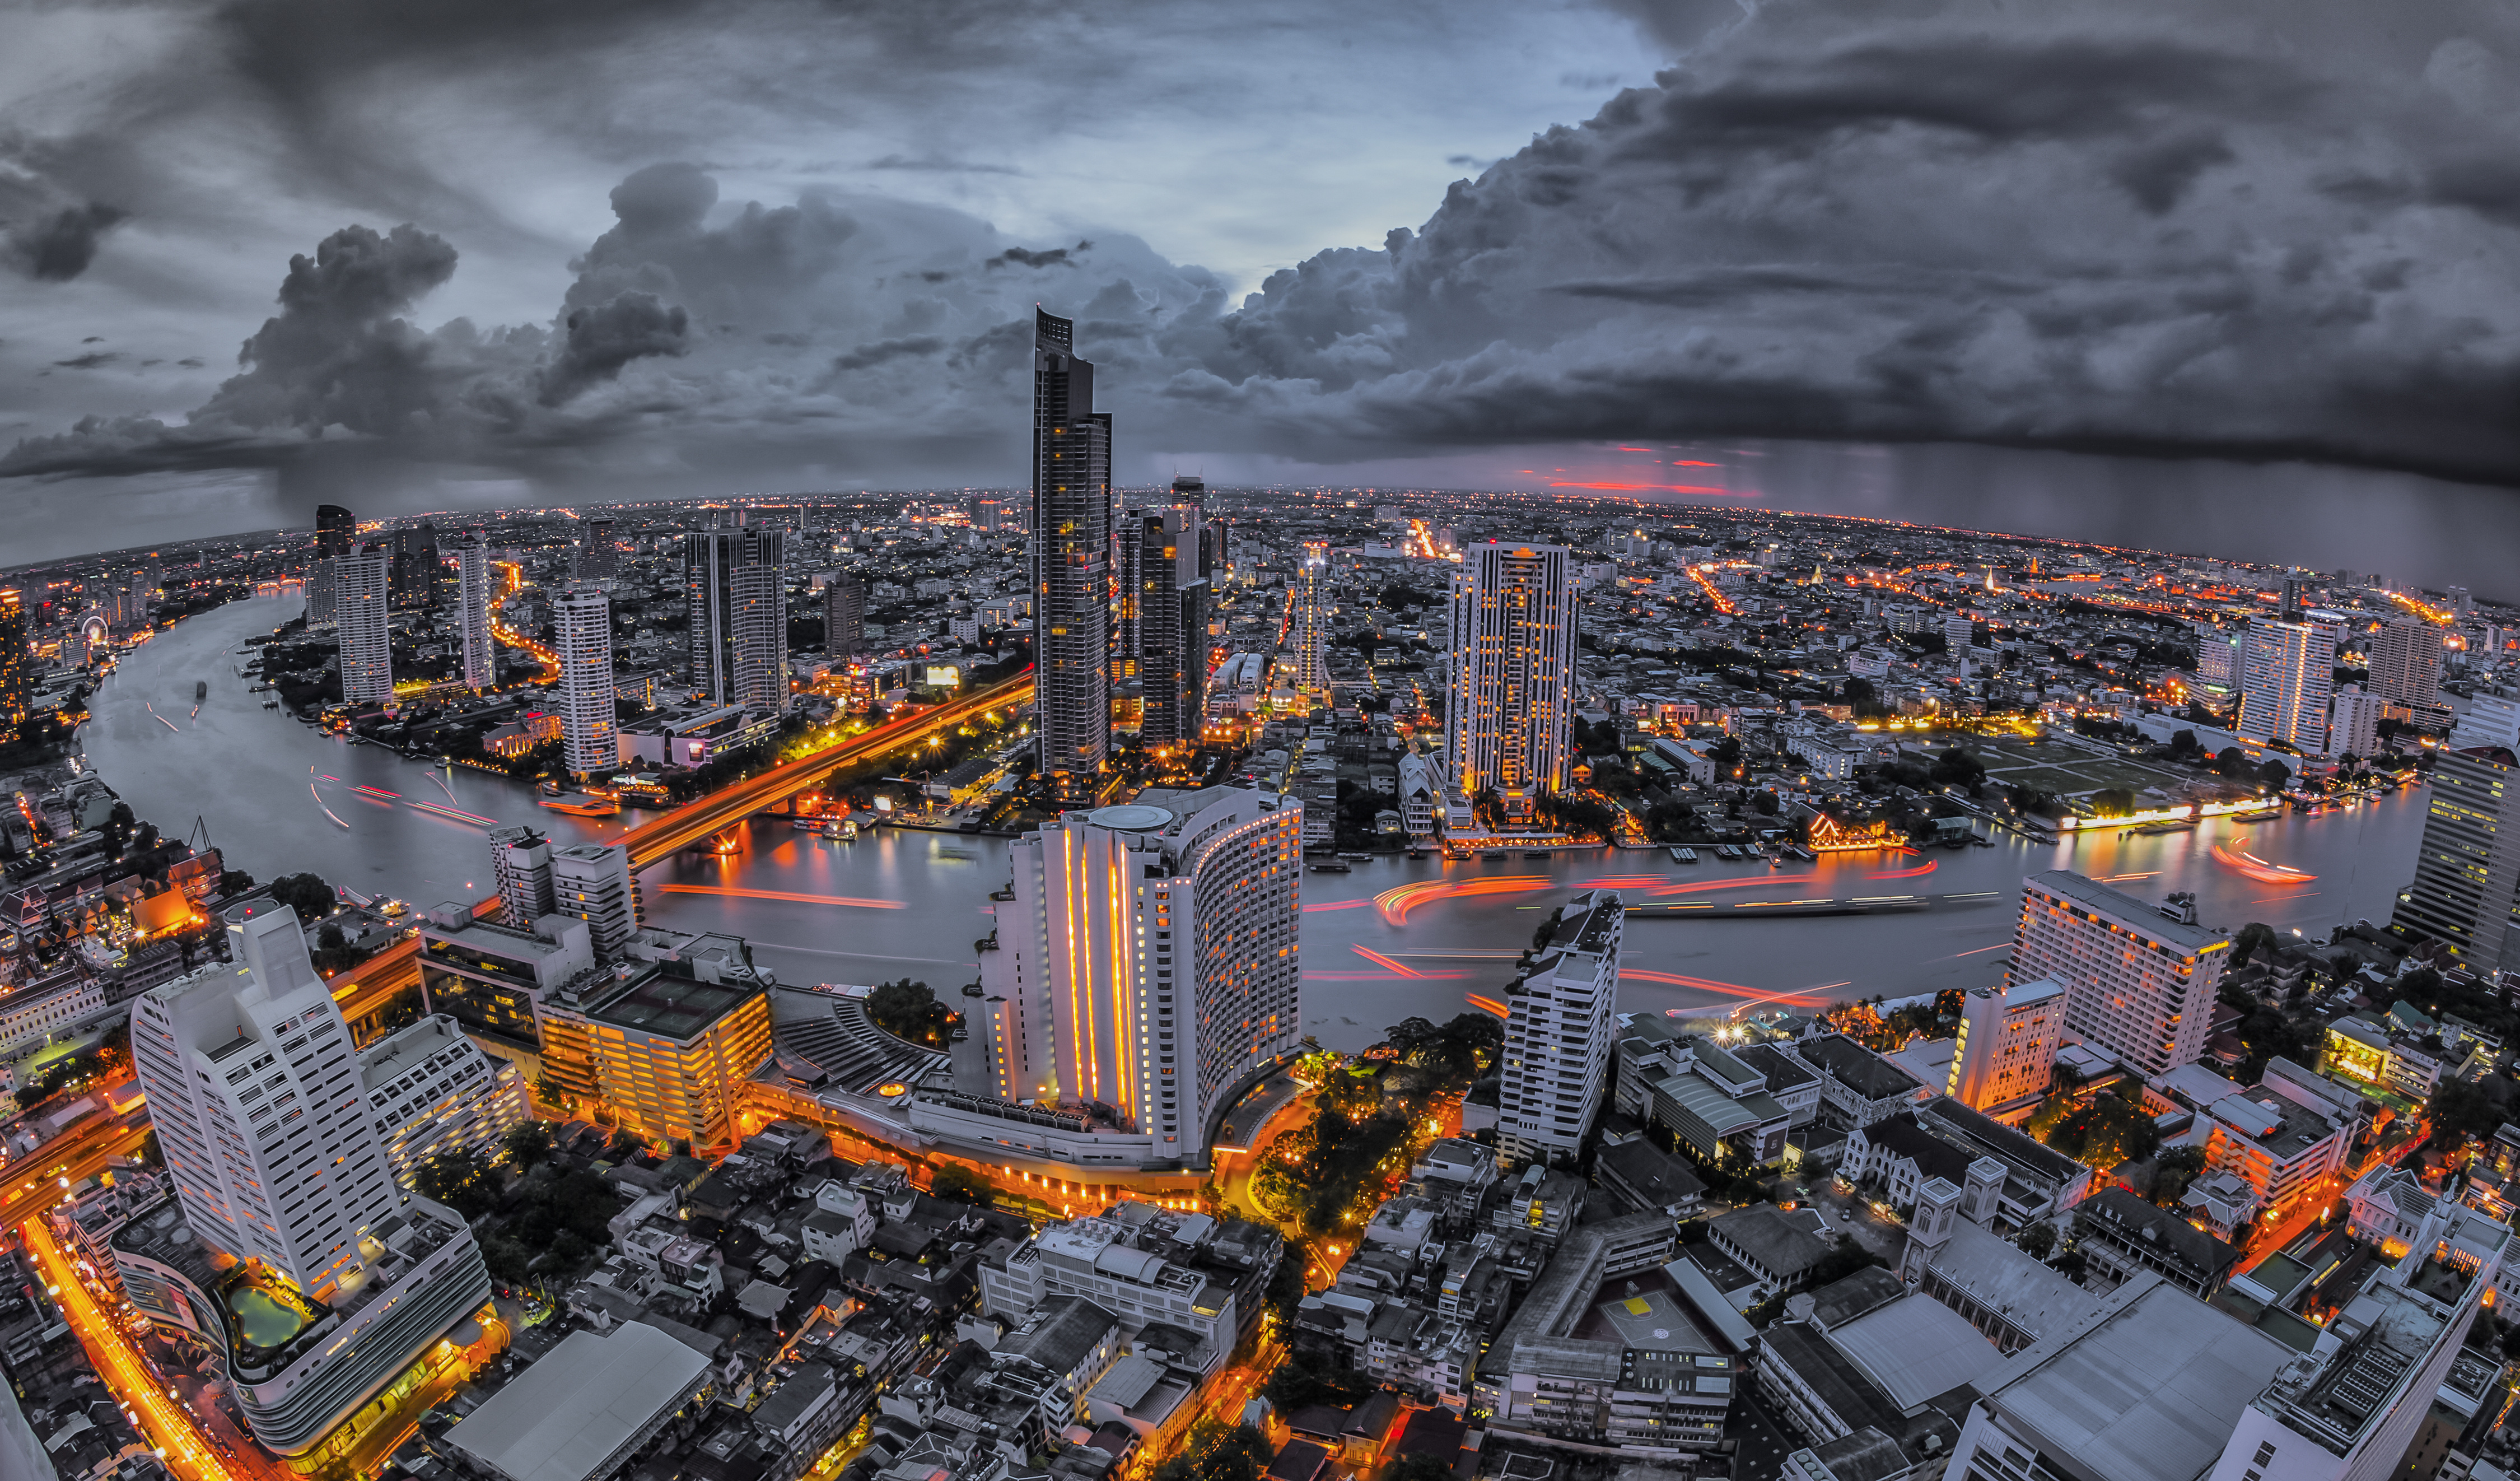 cities, view from above, night city, skyscrapers, megapolis, megalopolis, bangkok High Definition image